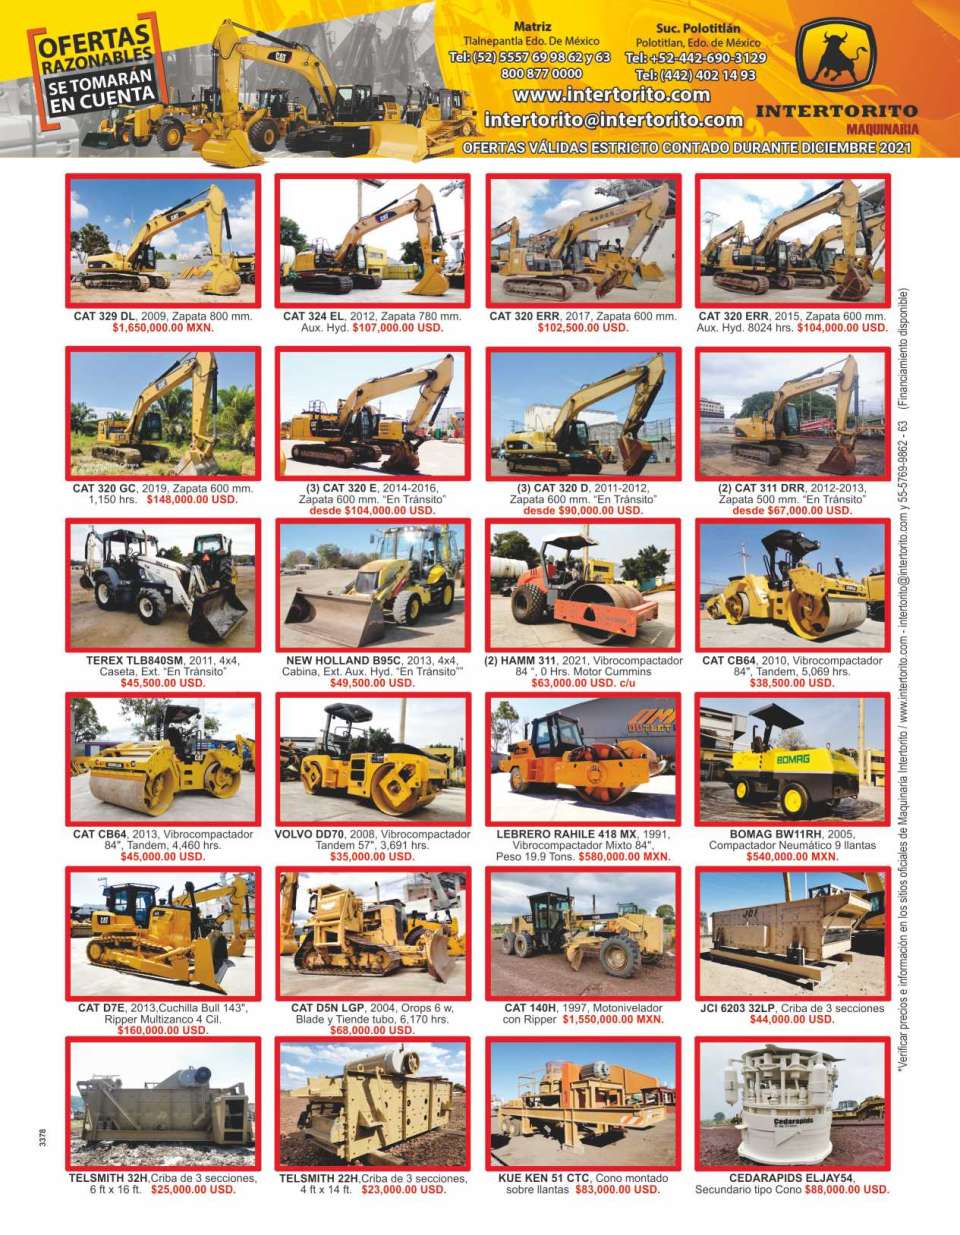 With more than 40 years of experience in the construction industry, we offer you the best brands of heavy equipment for rent and sale.